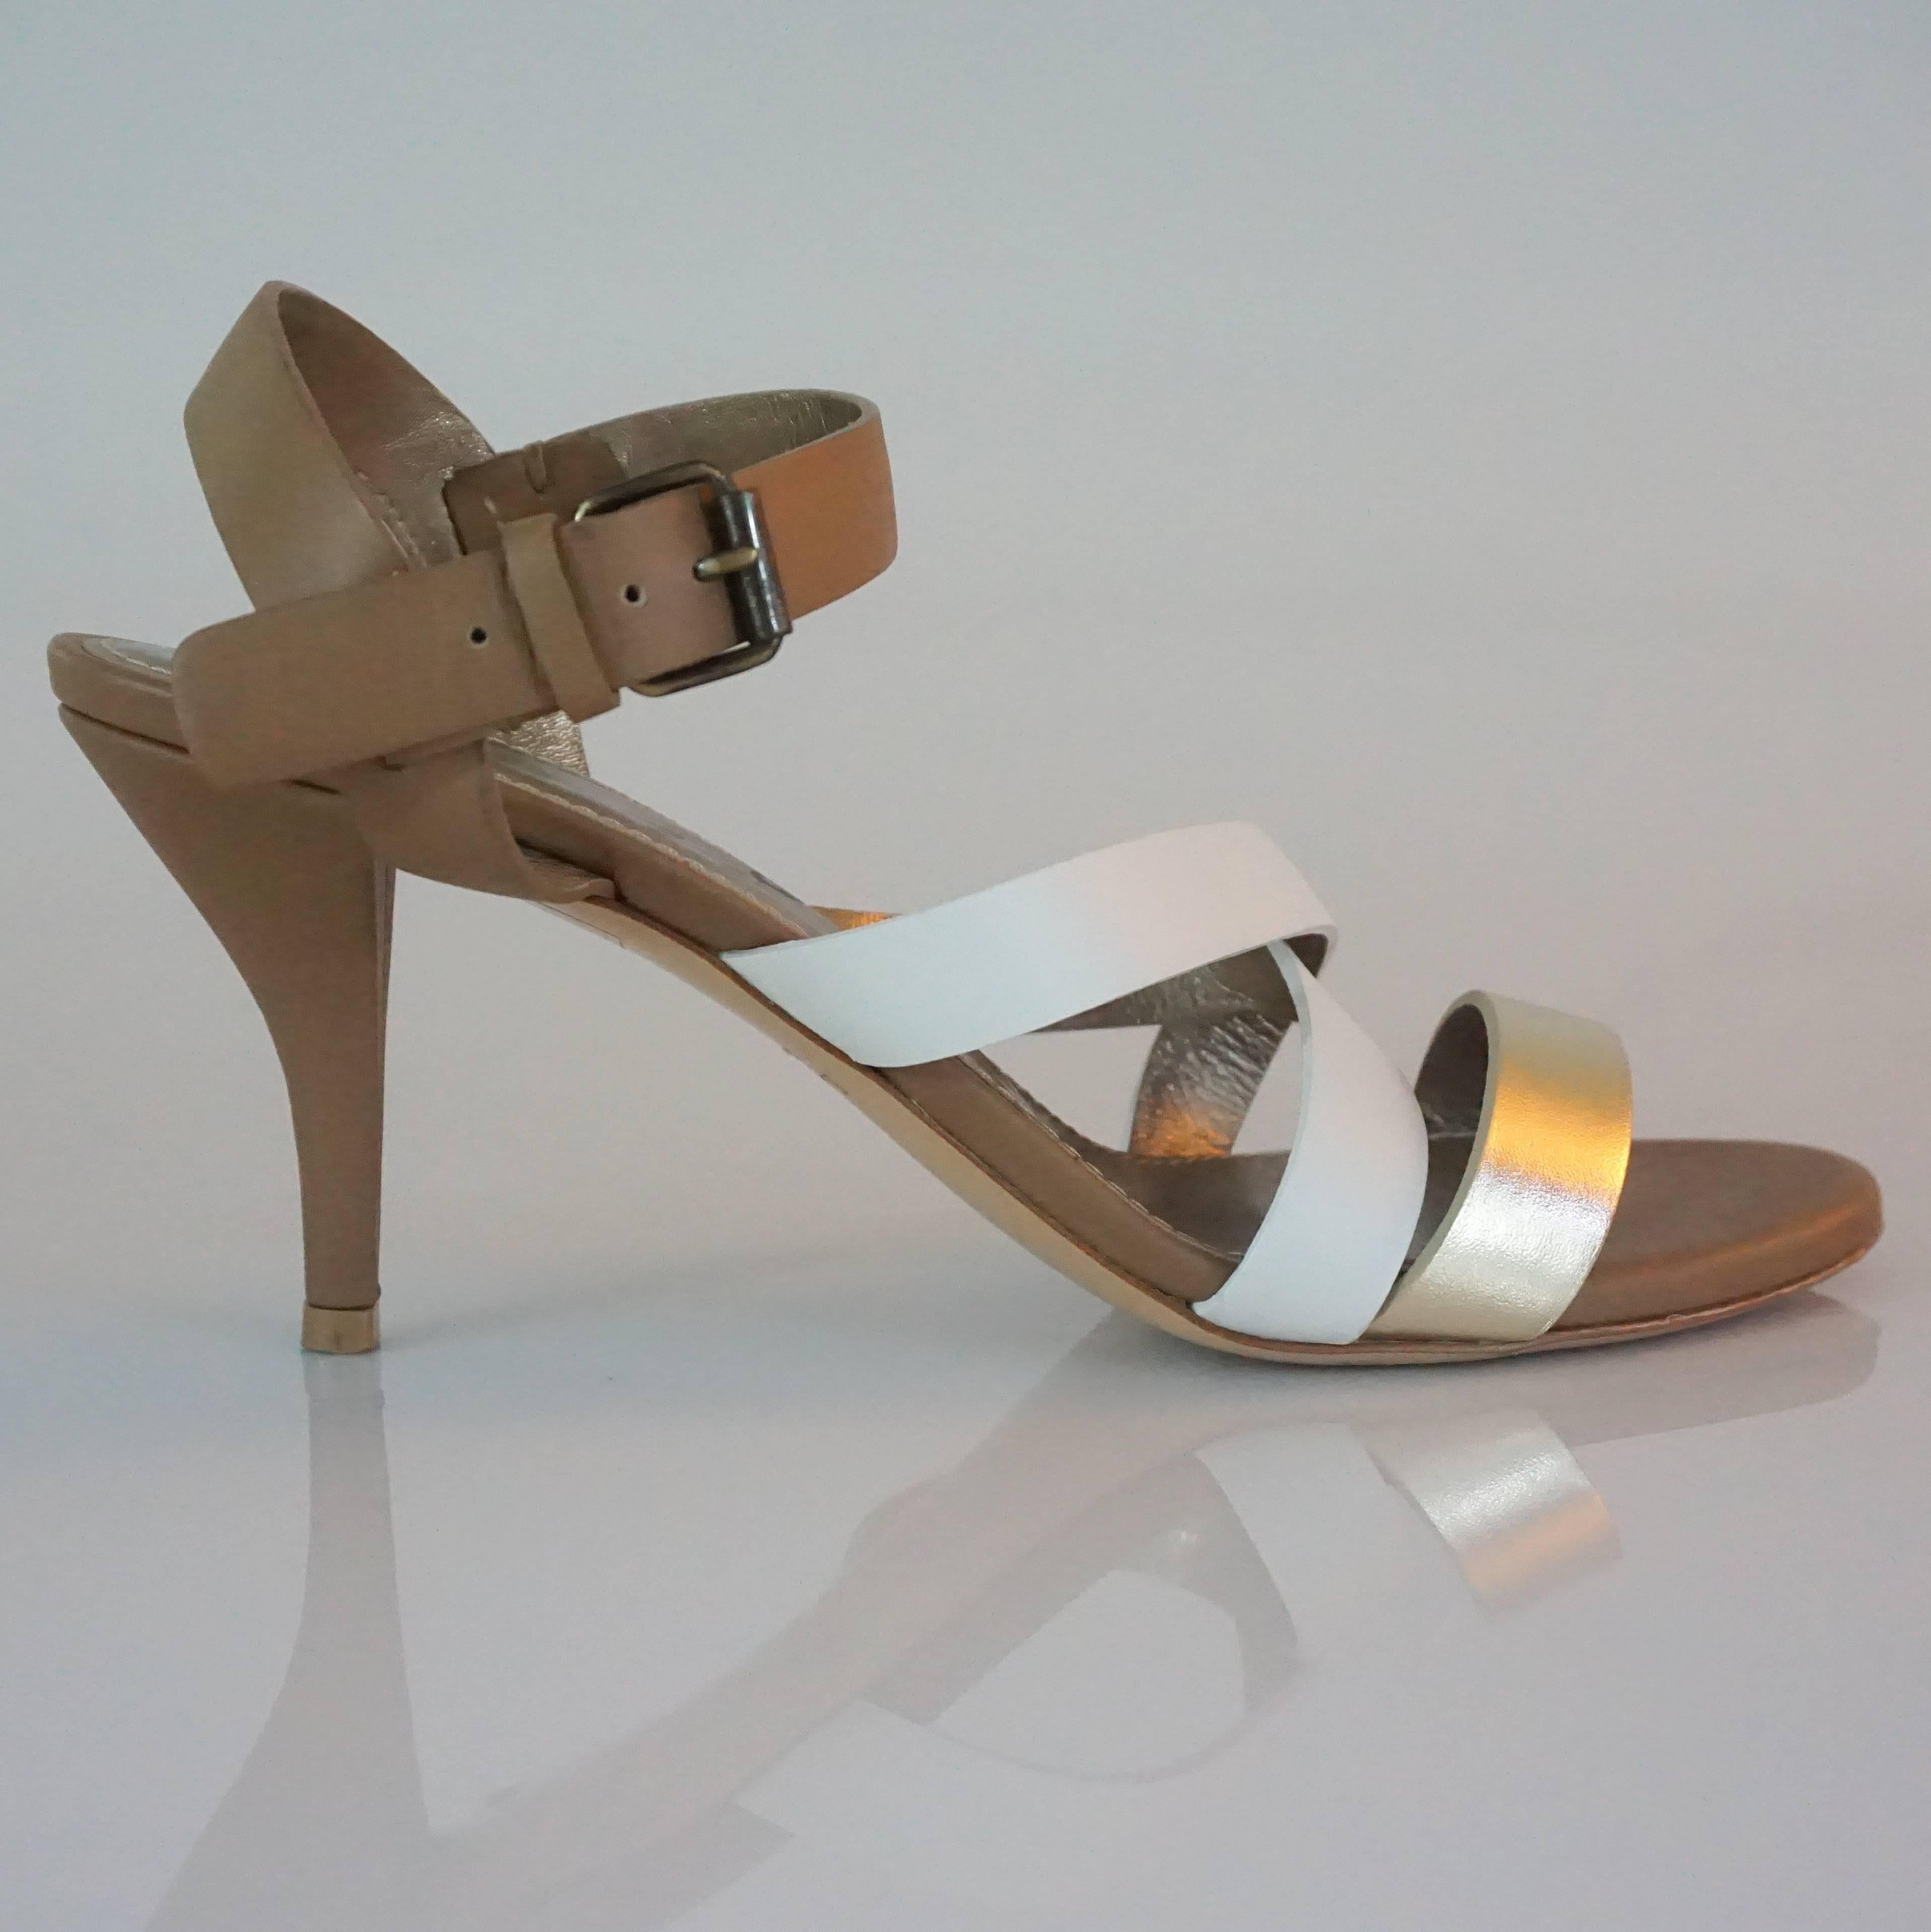 Lanvin Tan/White/Gold Strappy Leather Sandal - 37  This is a great summer sandal, and is very versatile for day or night. The shoe has an ankle strap and three straps across the front, and  is in excellent condition.

Heel Height 3.25